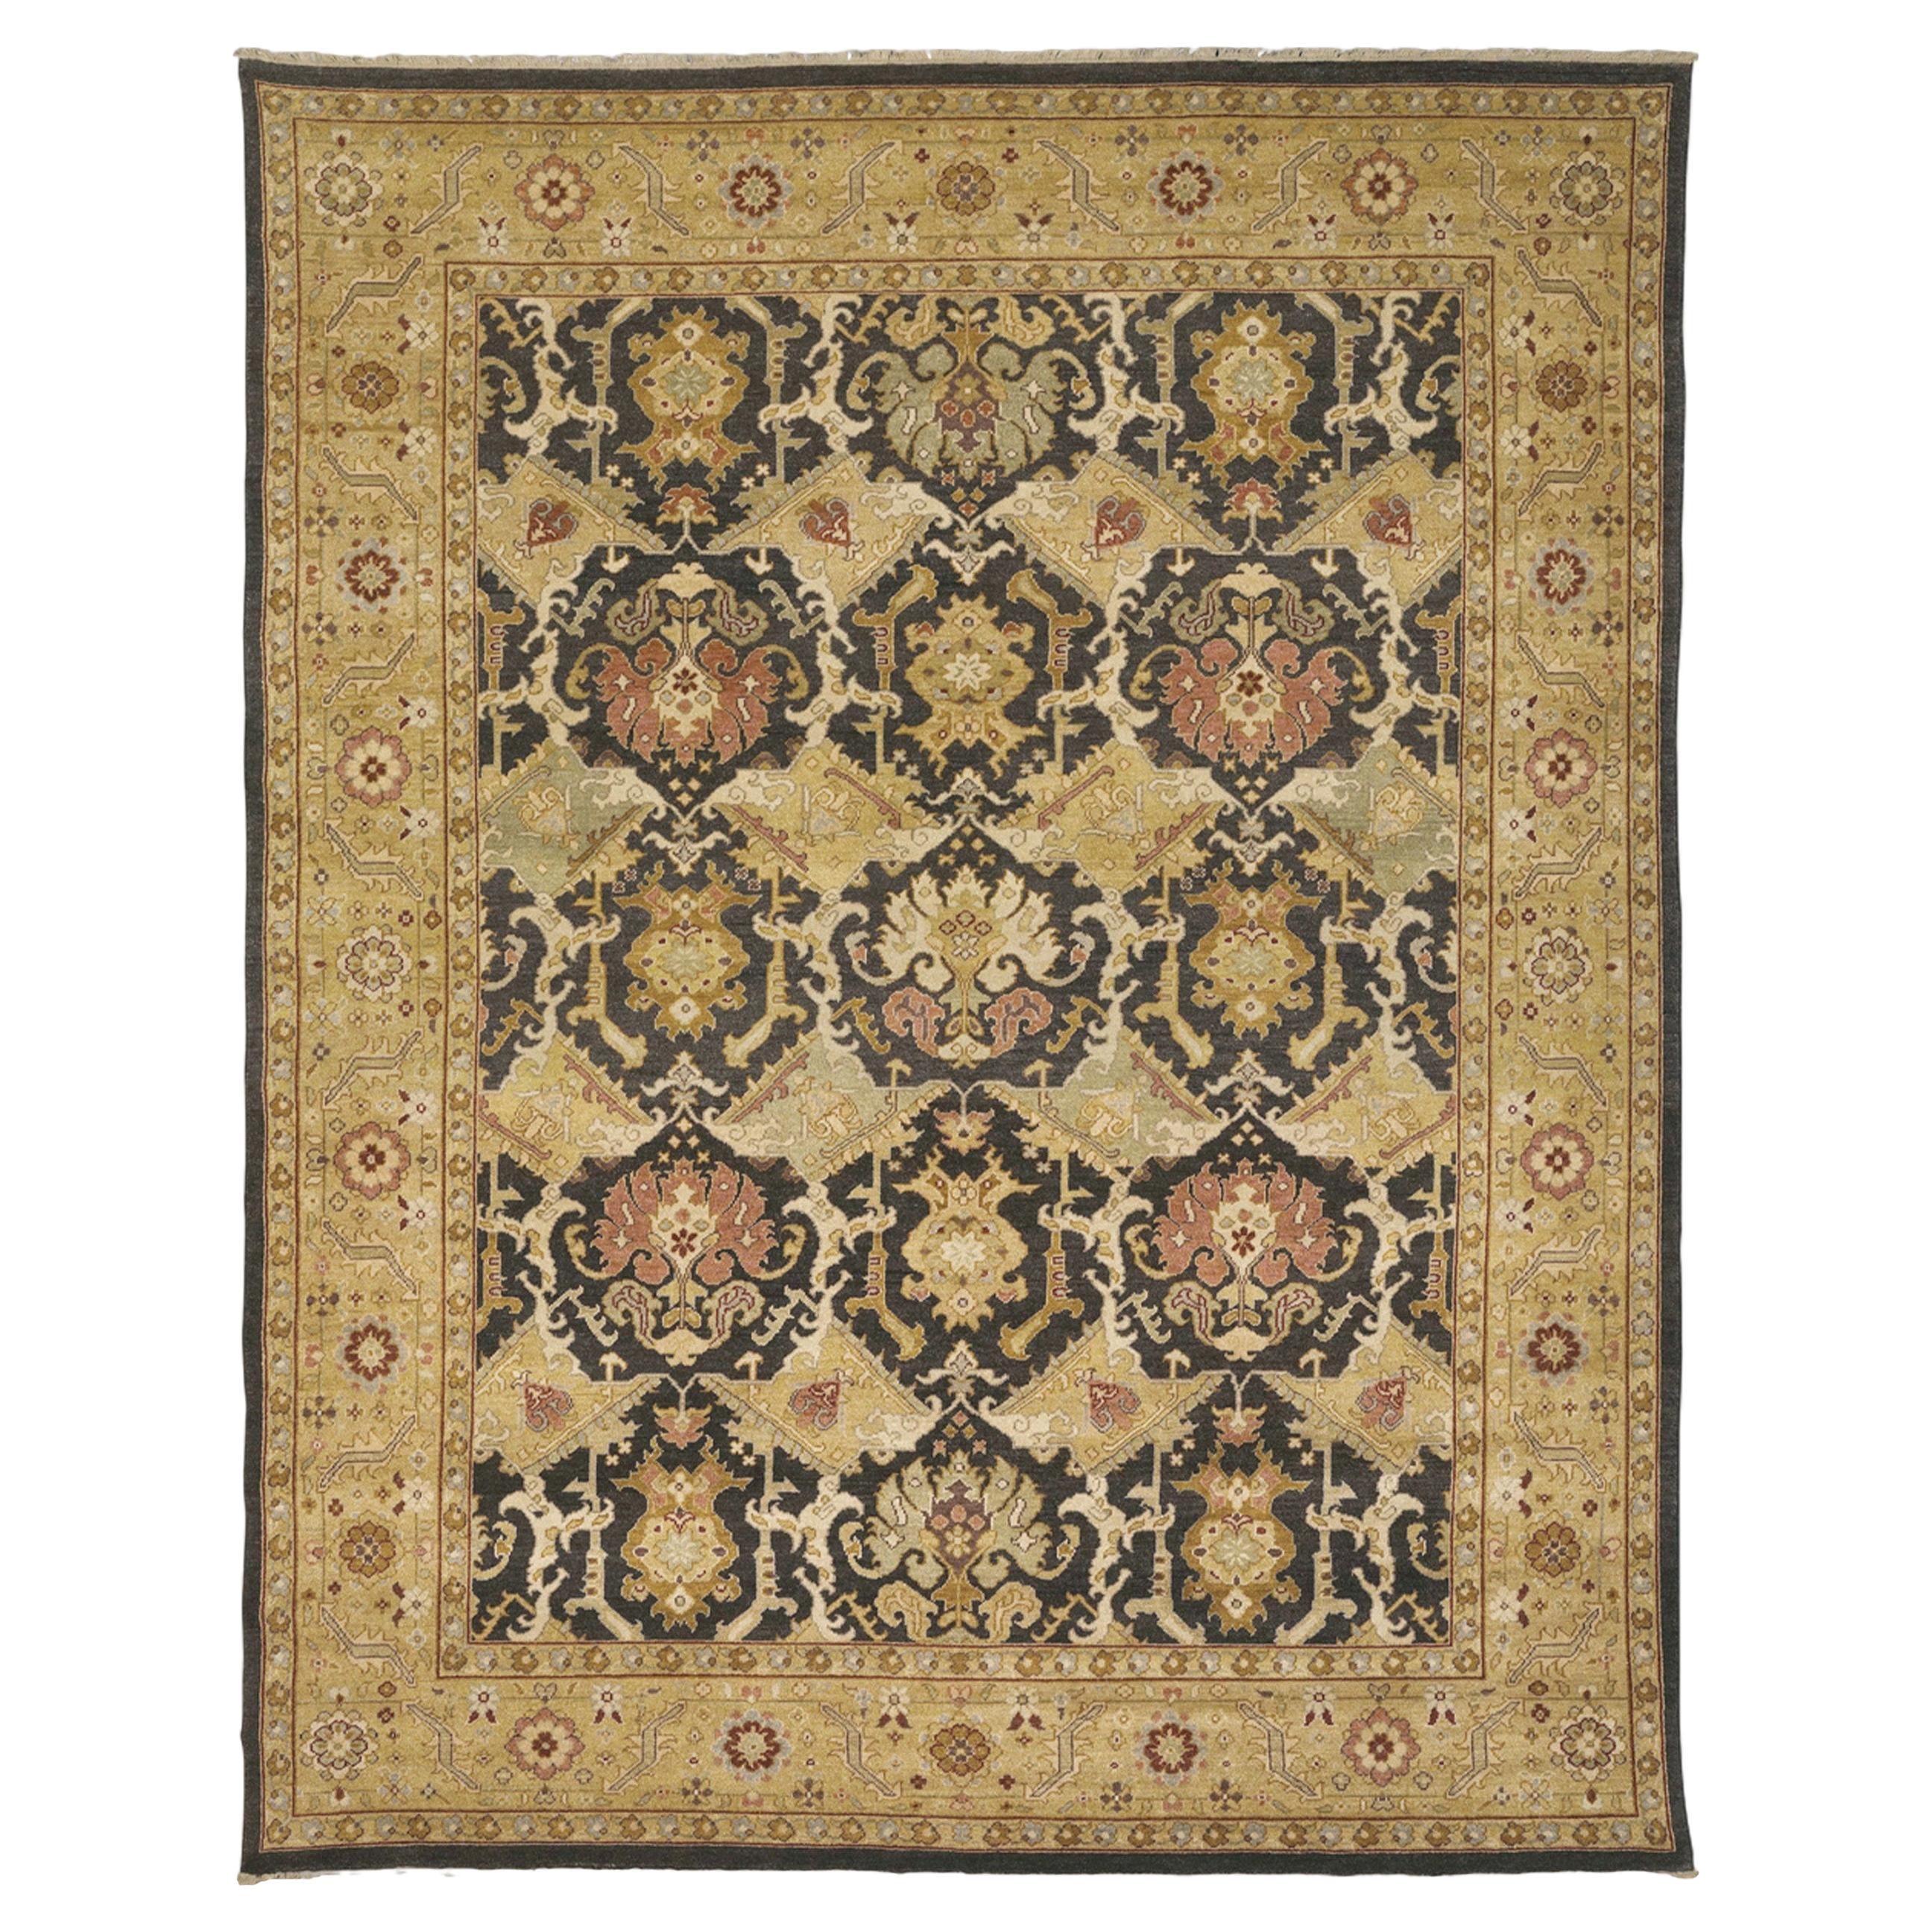 Luxury Traditional Hand-Knotted Mahal Brown and Gold 12x24 Rug